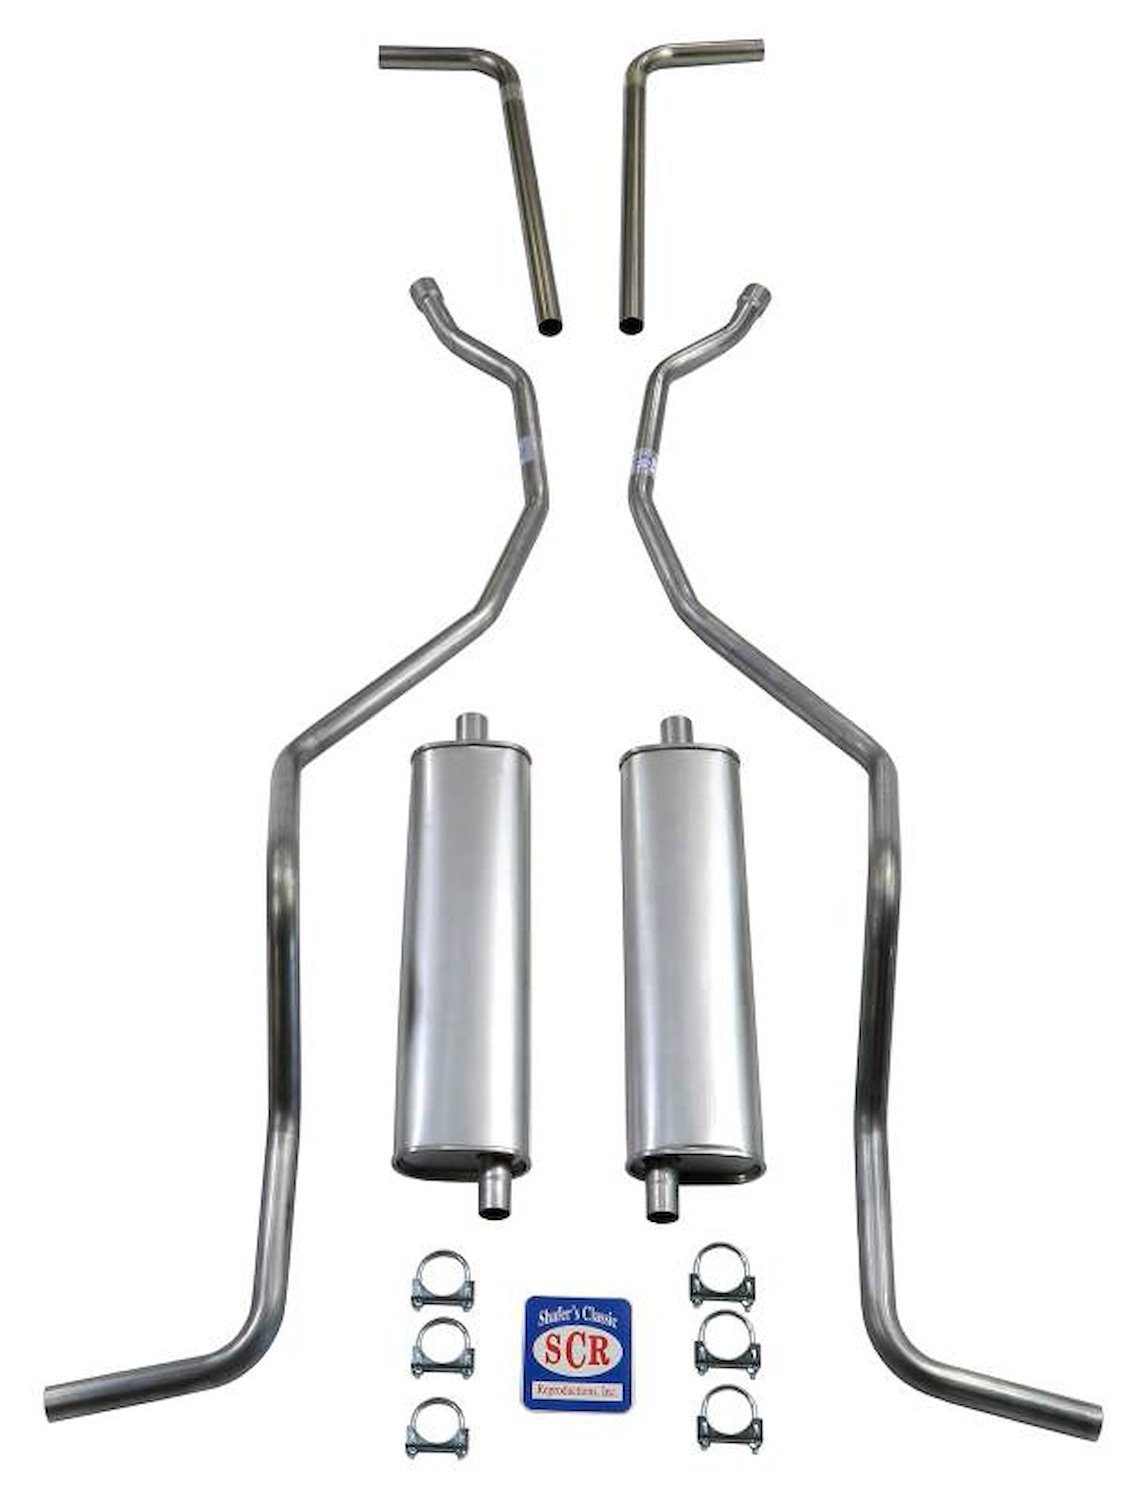 73048S 1960-1964 Chevrolet SW 8-cyl 2 in. Dual Exhaust System, 304 Stainless Steel